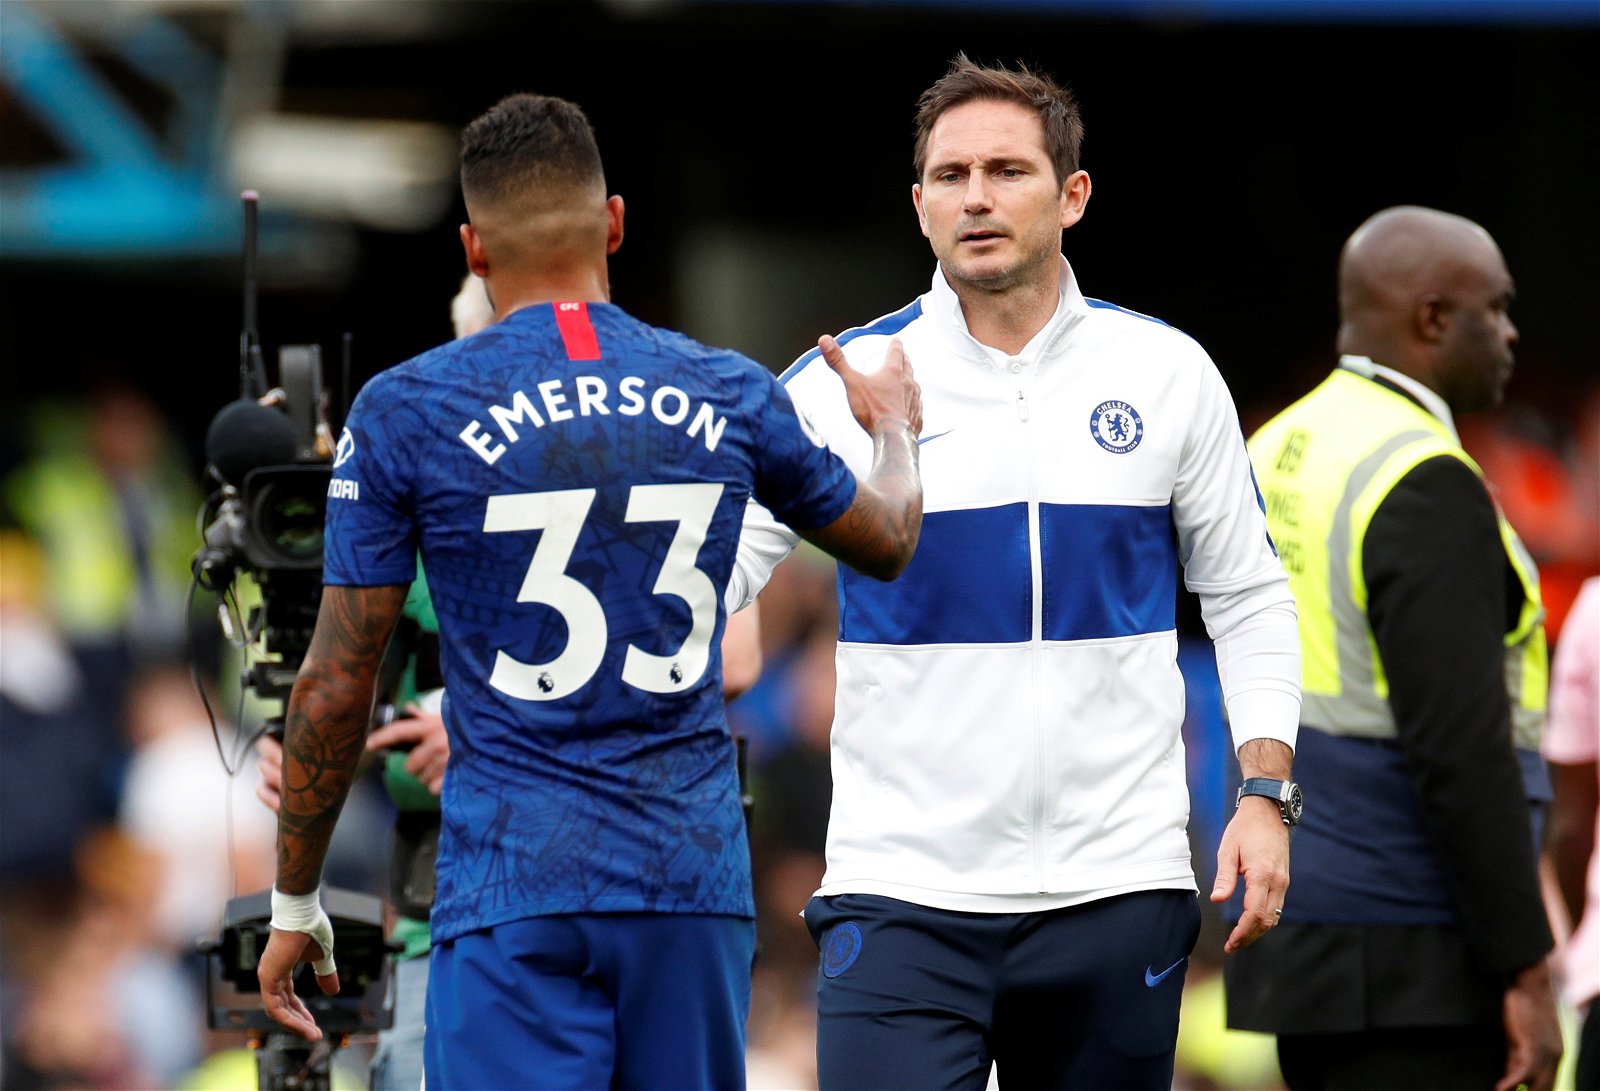 Chelsea face Emerson injury concerns ahead of Wolves clash